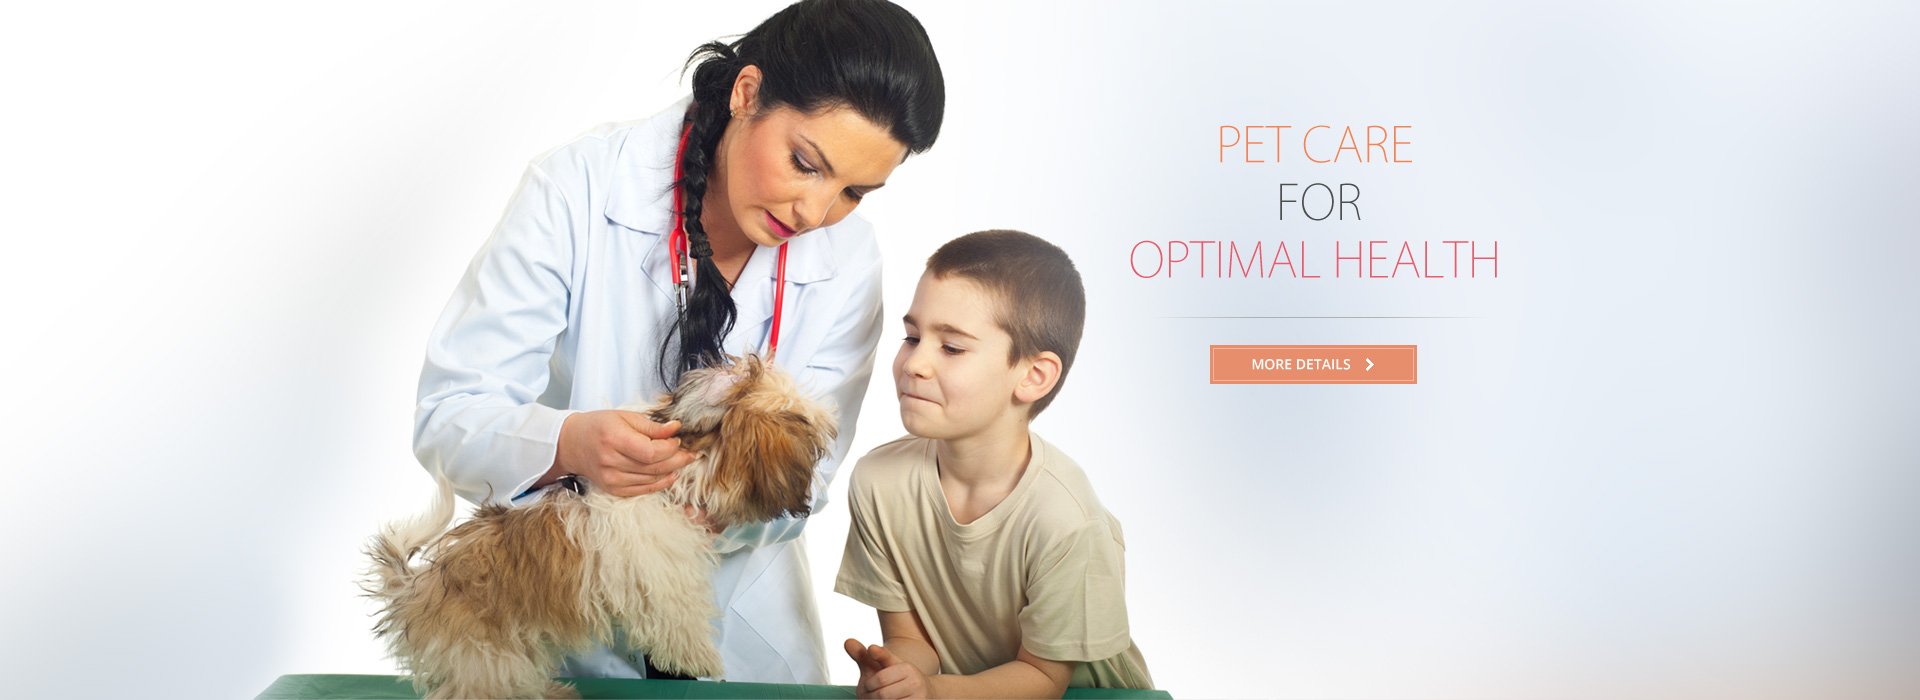 Pet Care for Optimal Health